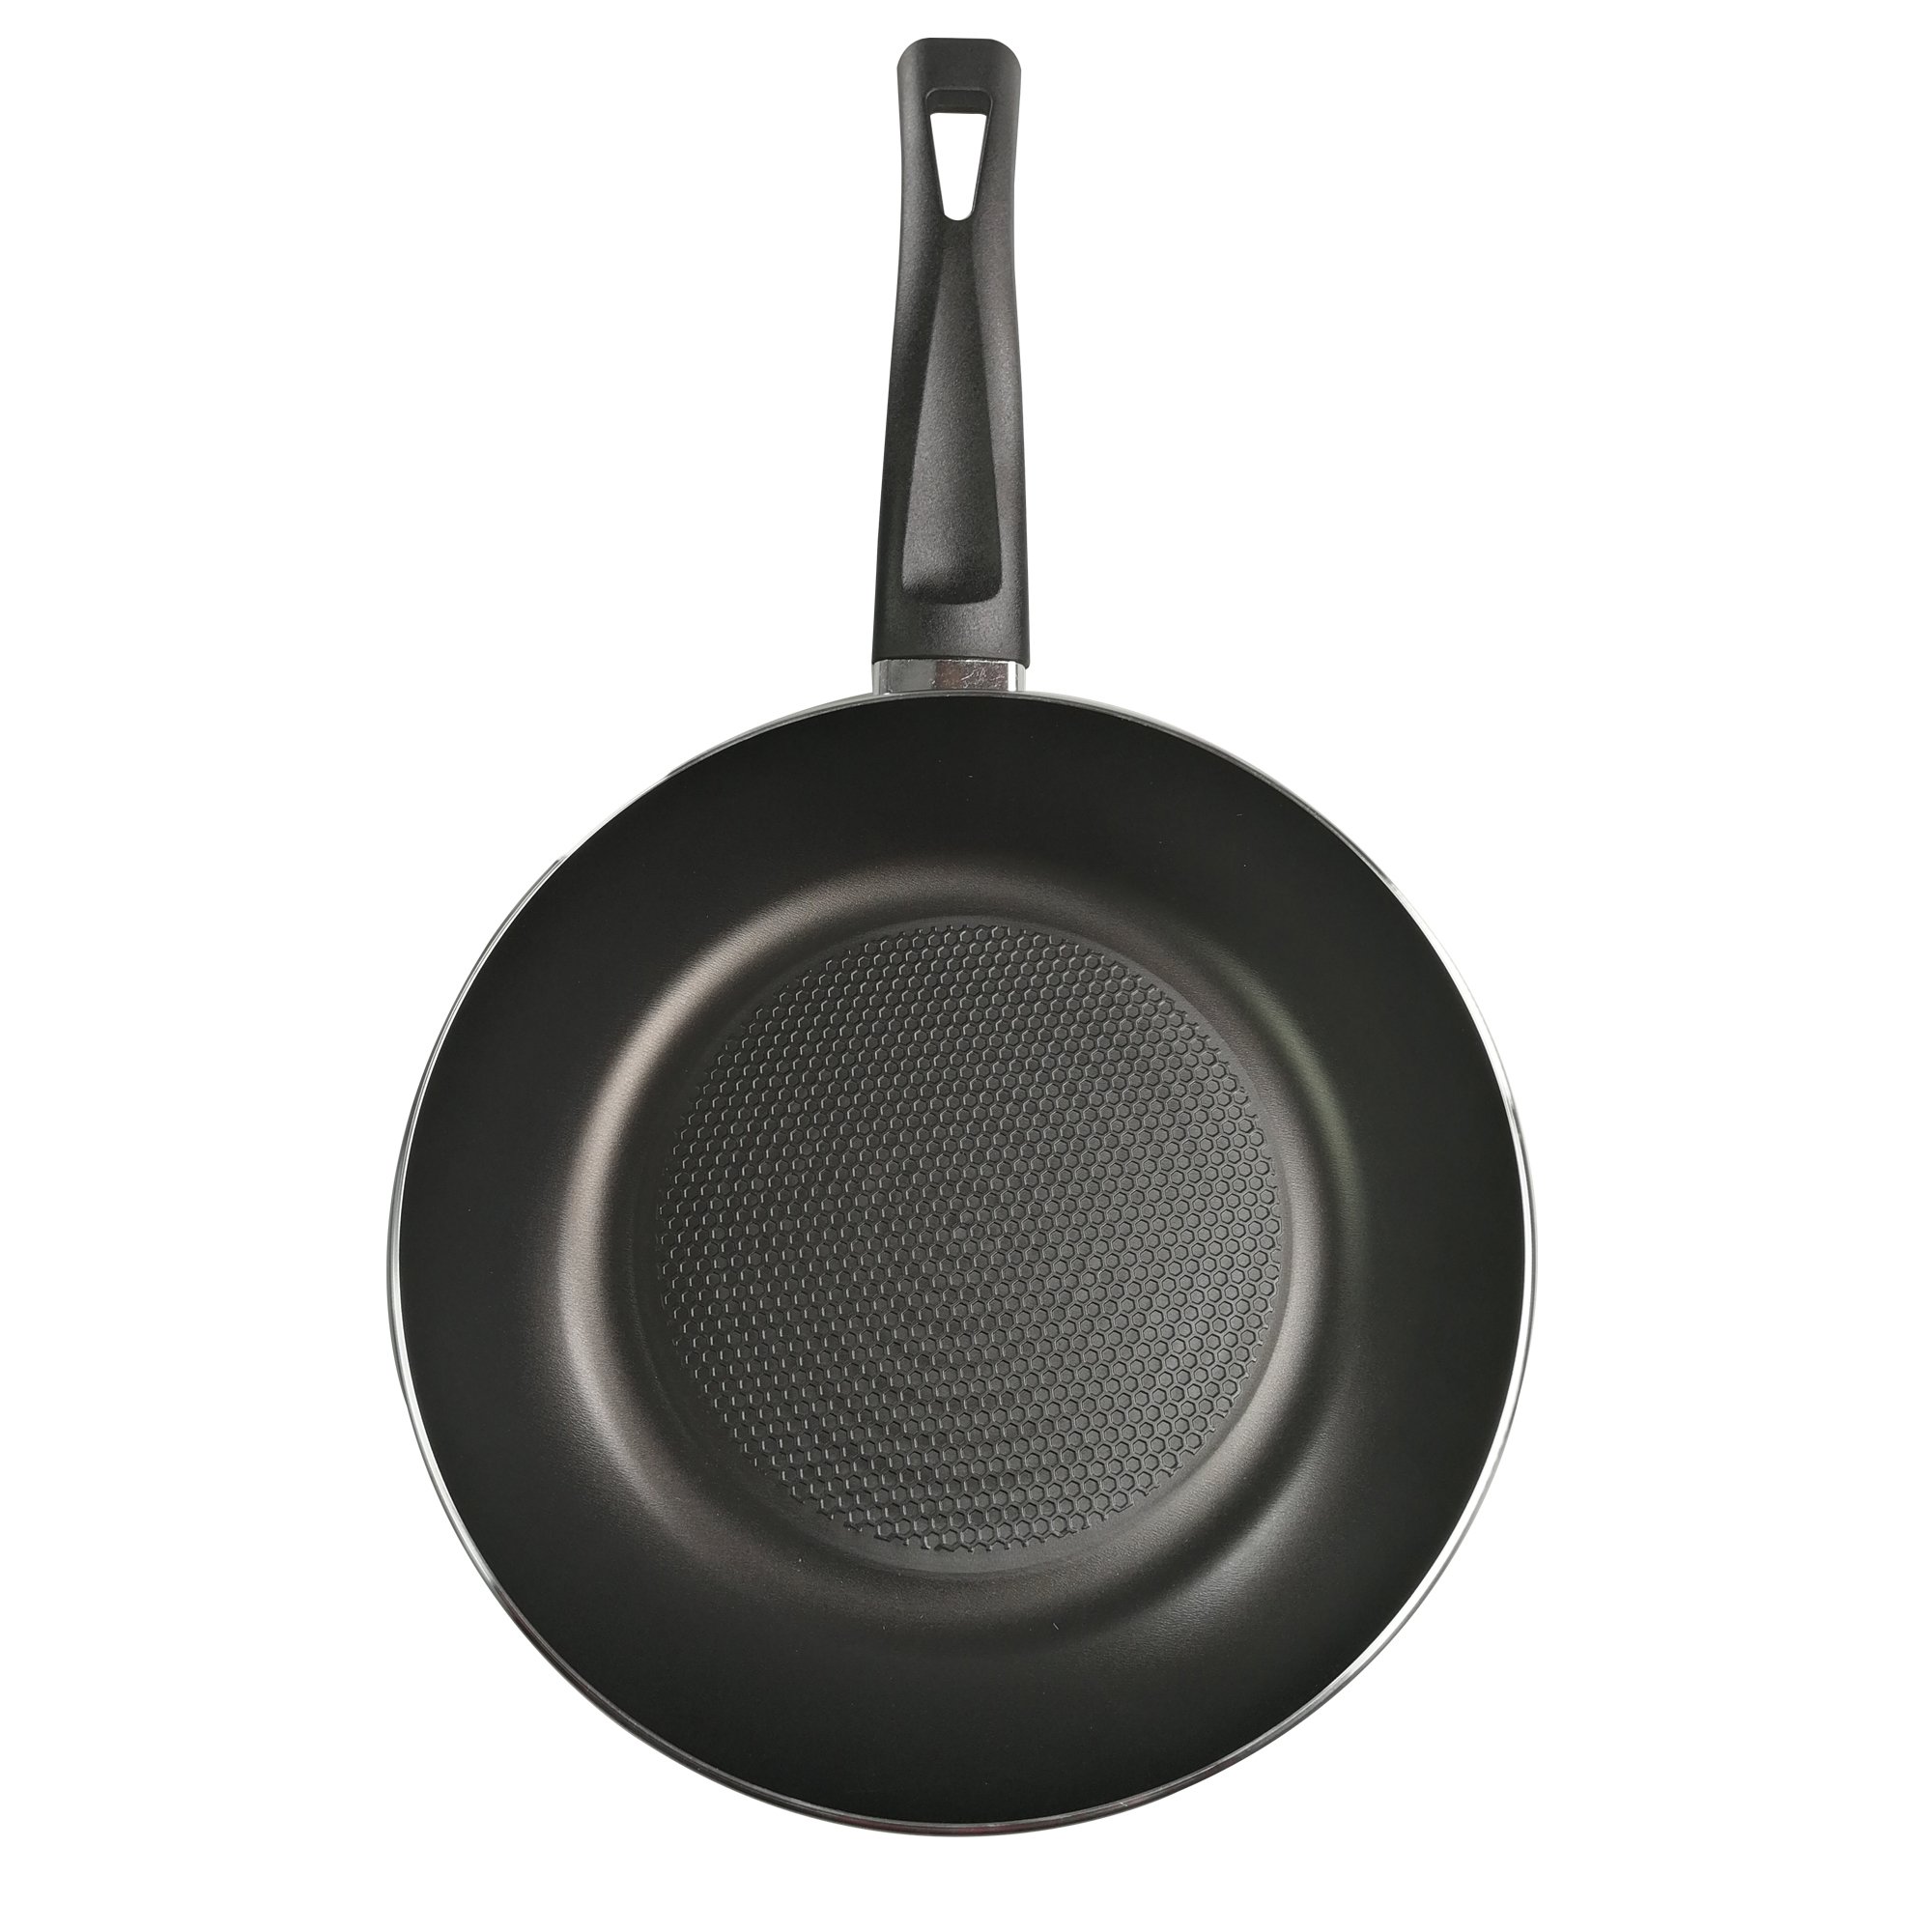 VERY TITAN® frying pan 28 cm, non-stick coated pan, induction and oven-safe, red